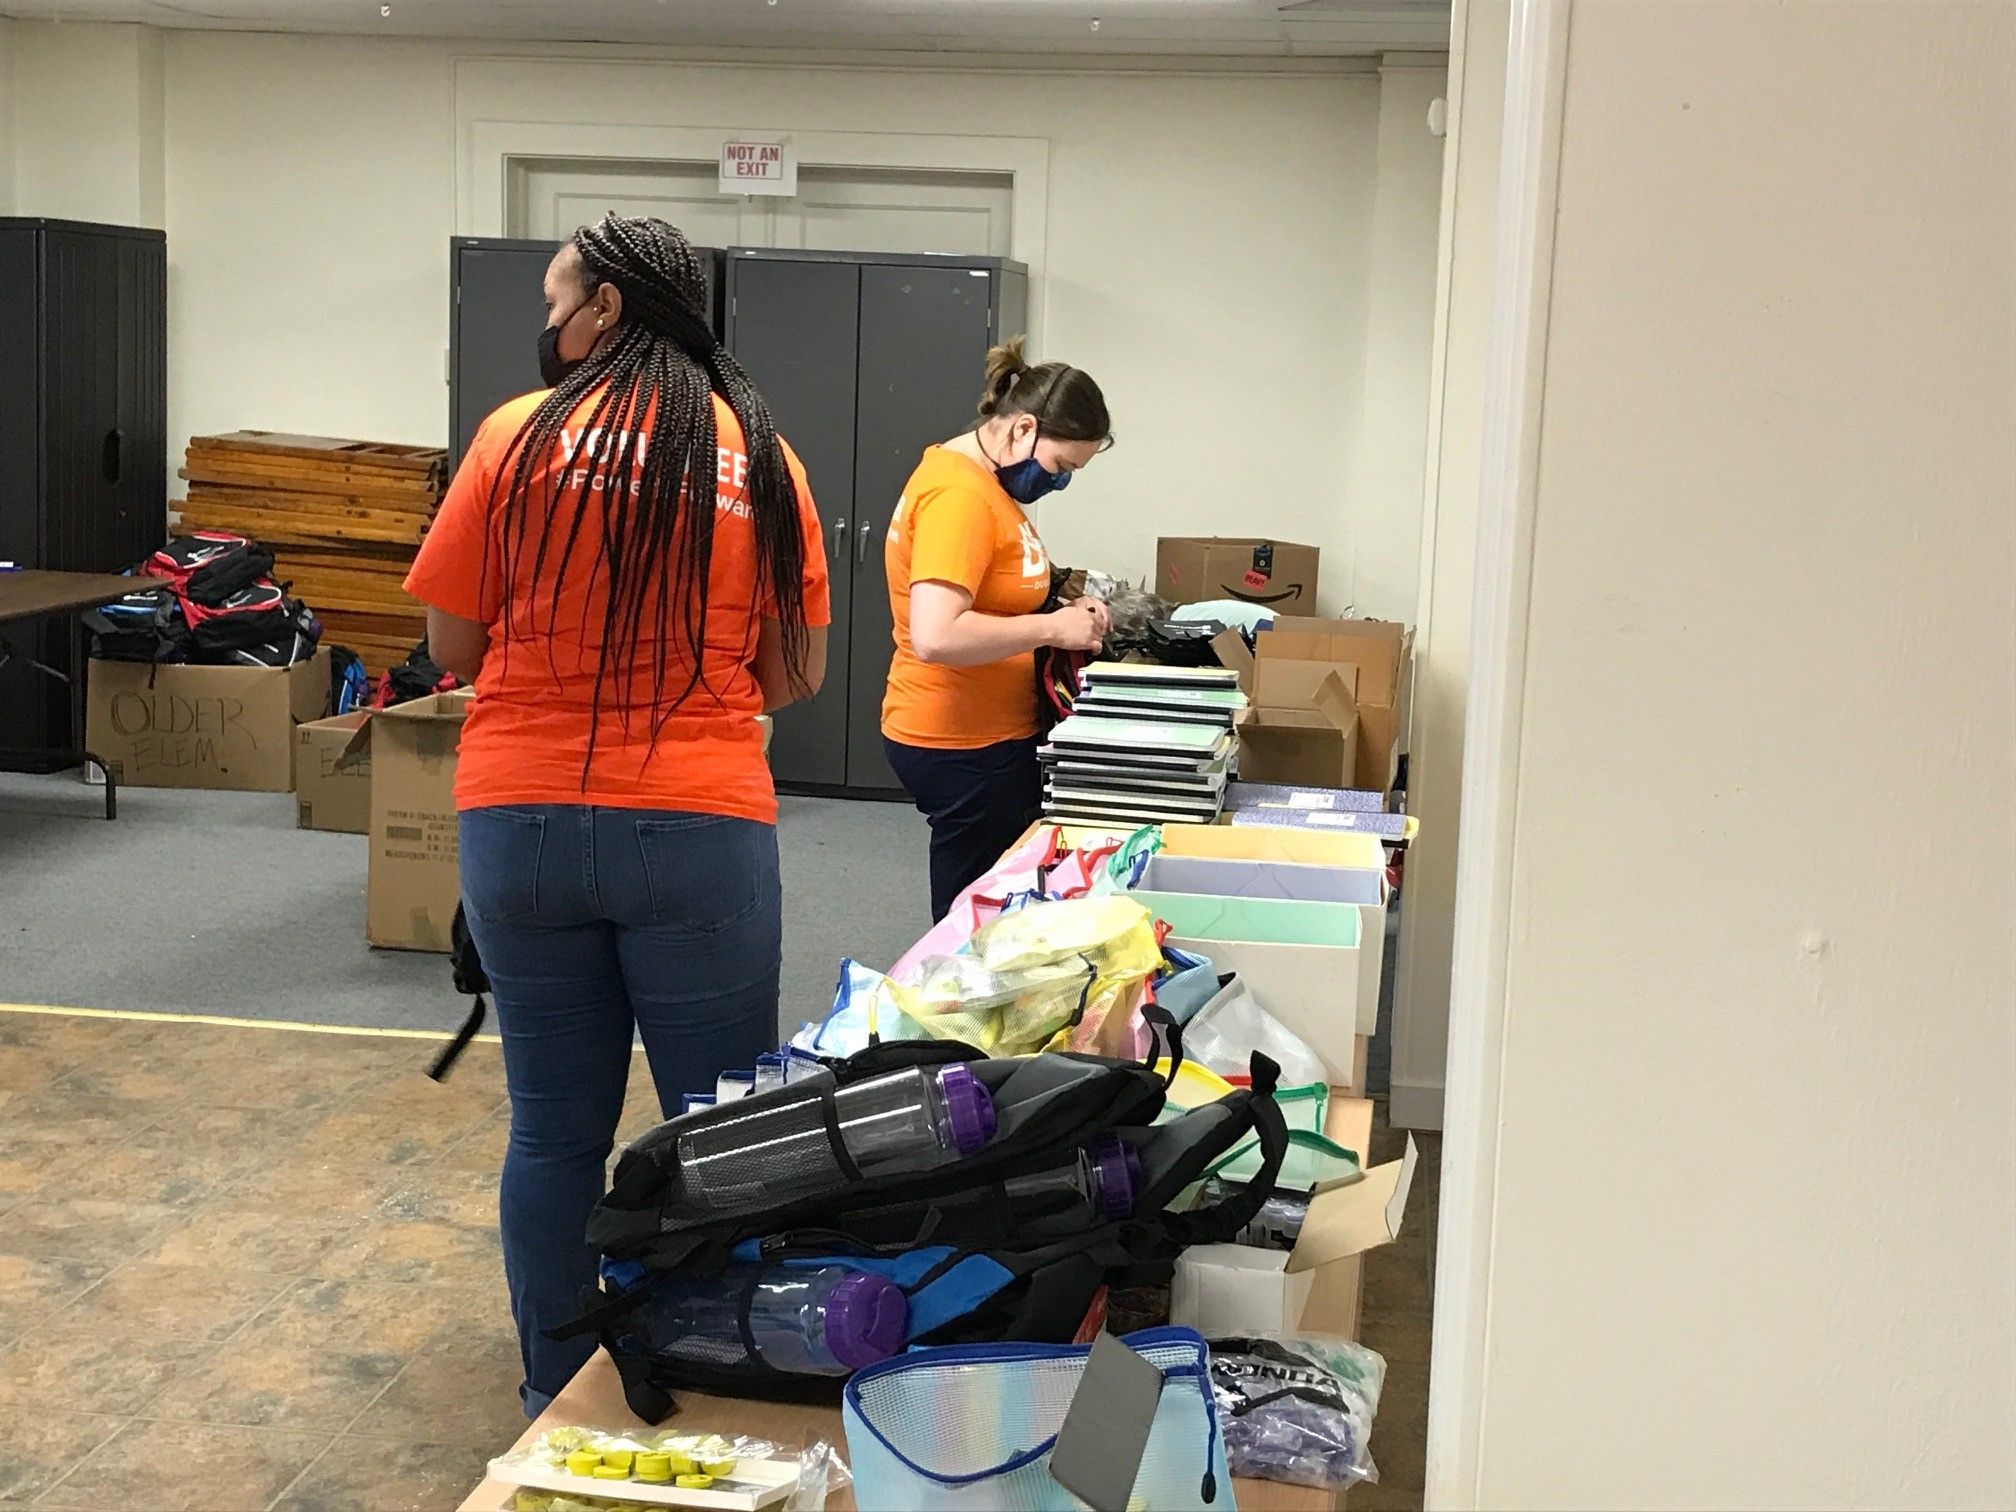 DLC volunteers Jenna DeLozier (right) and Amber Watson help fill backpacks with supplies for Hosanna House's back-to-school giveaway.